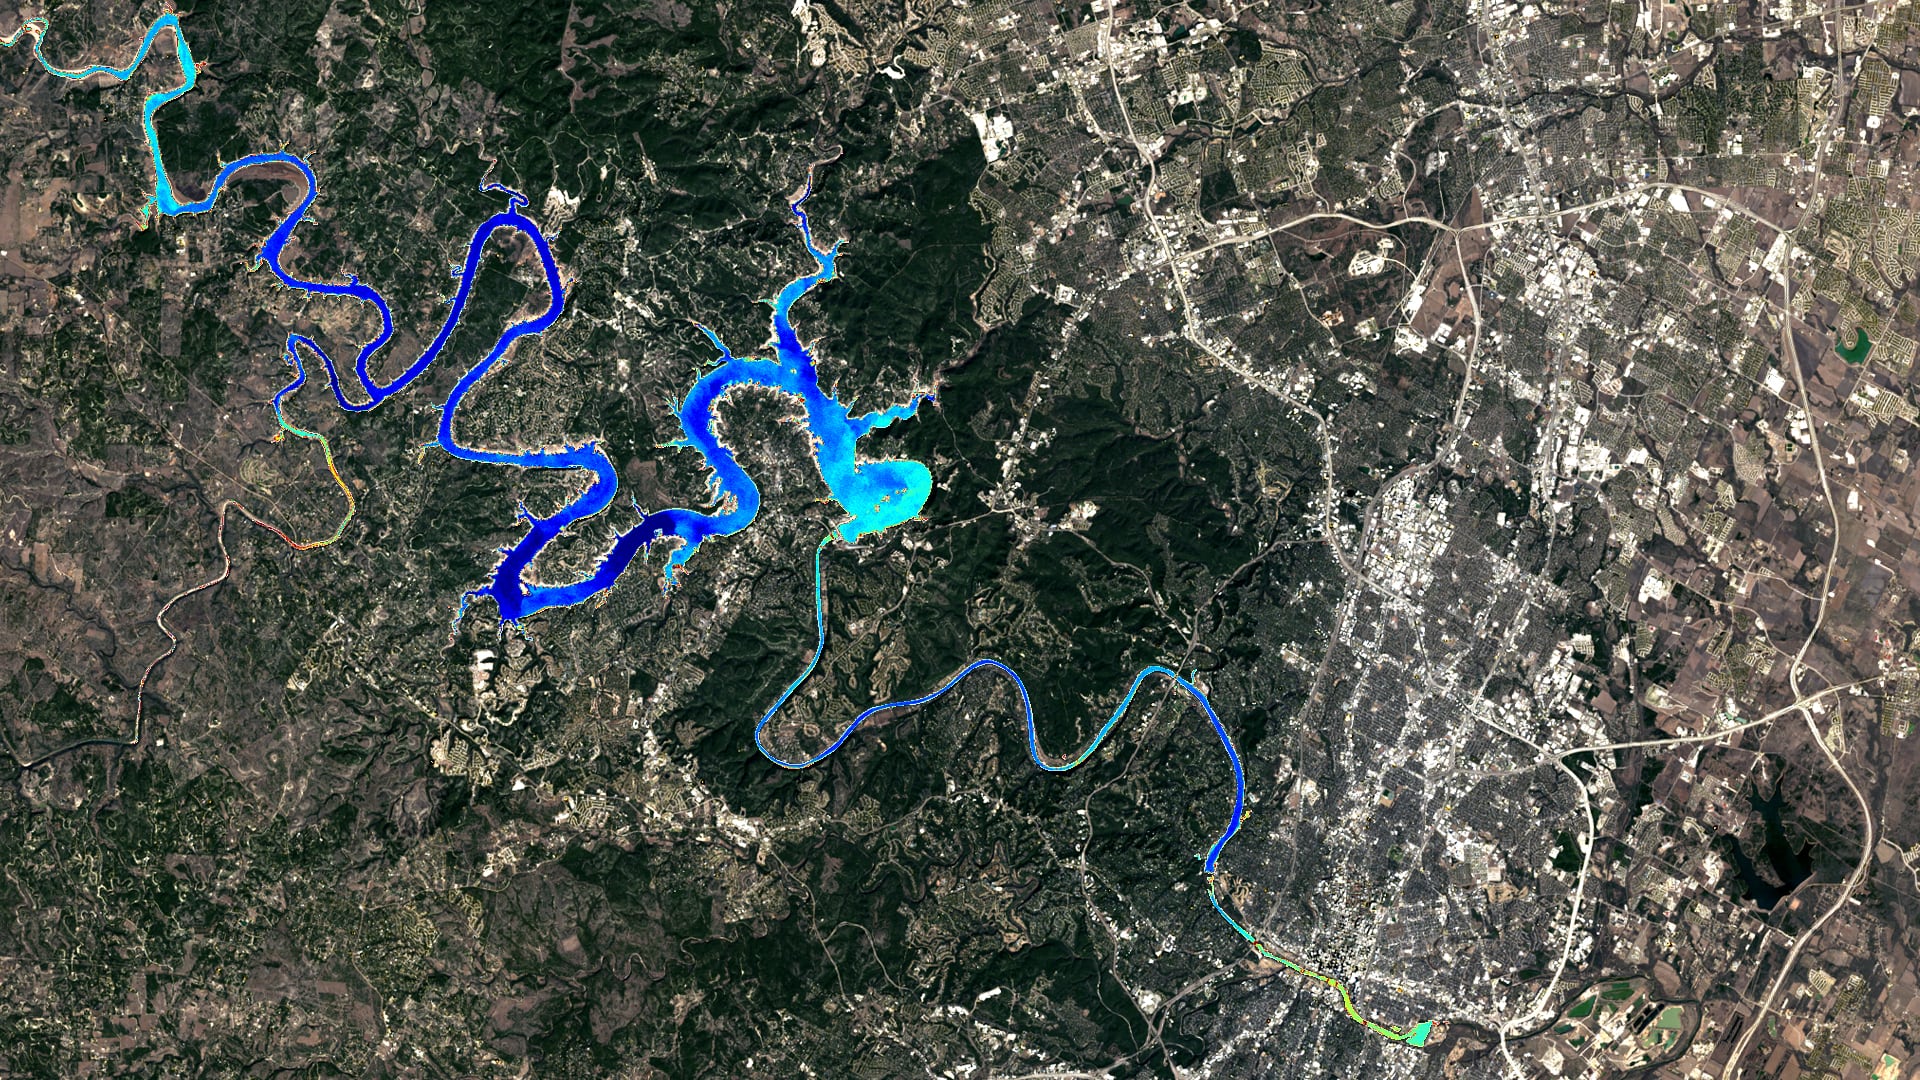 Imagery of turbidity captured by the NASA Landsat 8 Operational Land Imager on Dec 24, 2020. Pictured is the lower portion of the Texas Highland Lakes chain with the city of Austin, Texas to the right. Dark blue corresponds to low, green to medium, and orange and red to high turbidity levels. Monitoring turbidity can aid in the understanding of algal event development throughout the Highland Lakes chain.Keywords: Highland Lakes, Colorado River, Texas Hill Country, Austin, Lake Travis, Lady Bird Lake, Lake Austin, Lake LBJ, Lake Marble Falls, Landsat 8 OLI